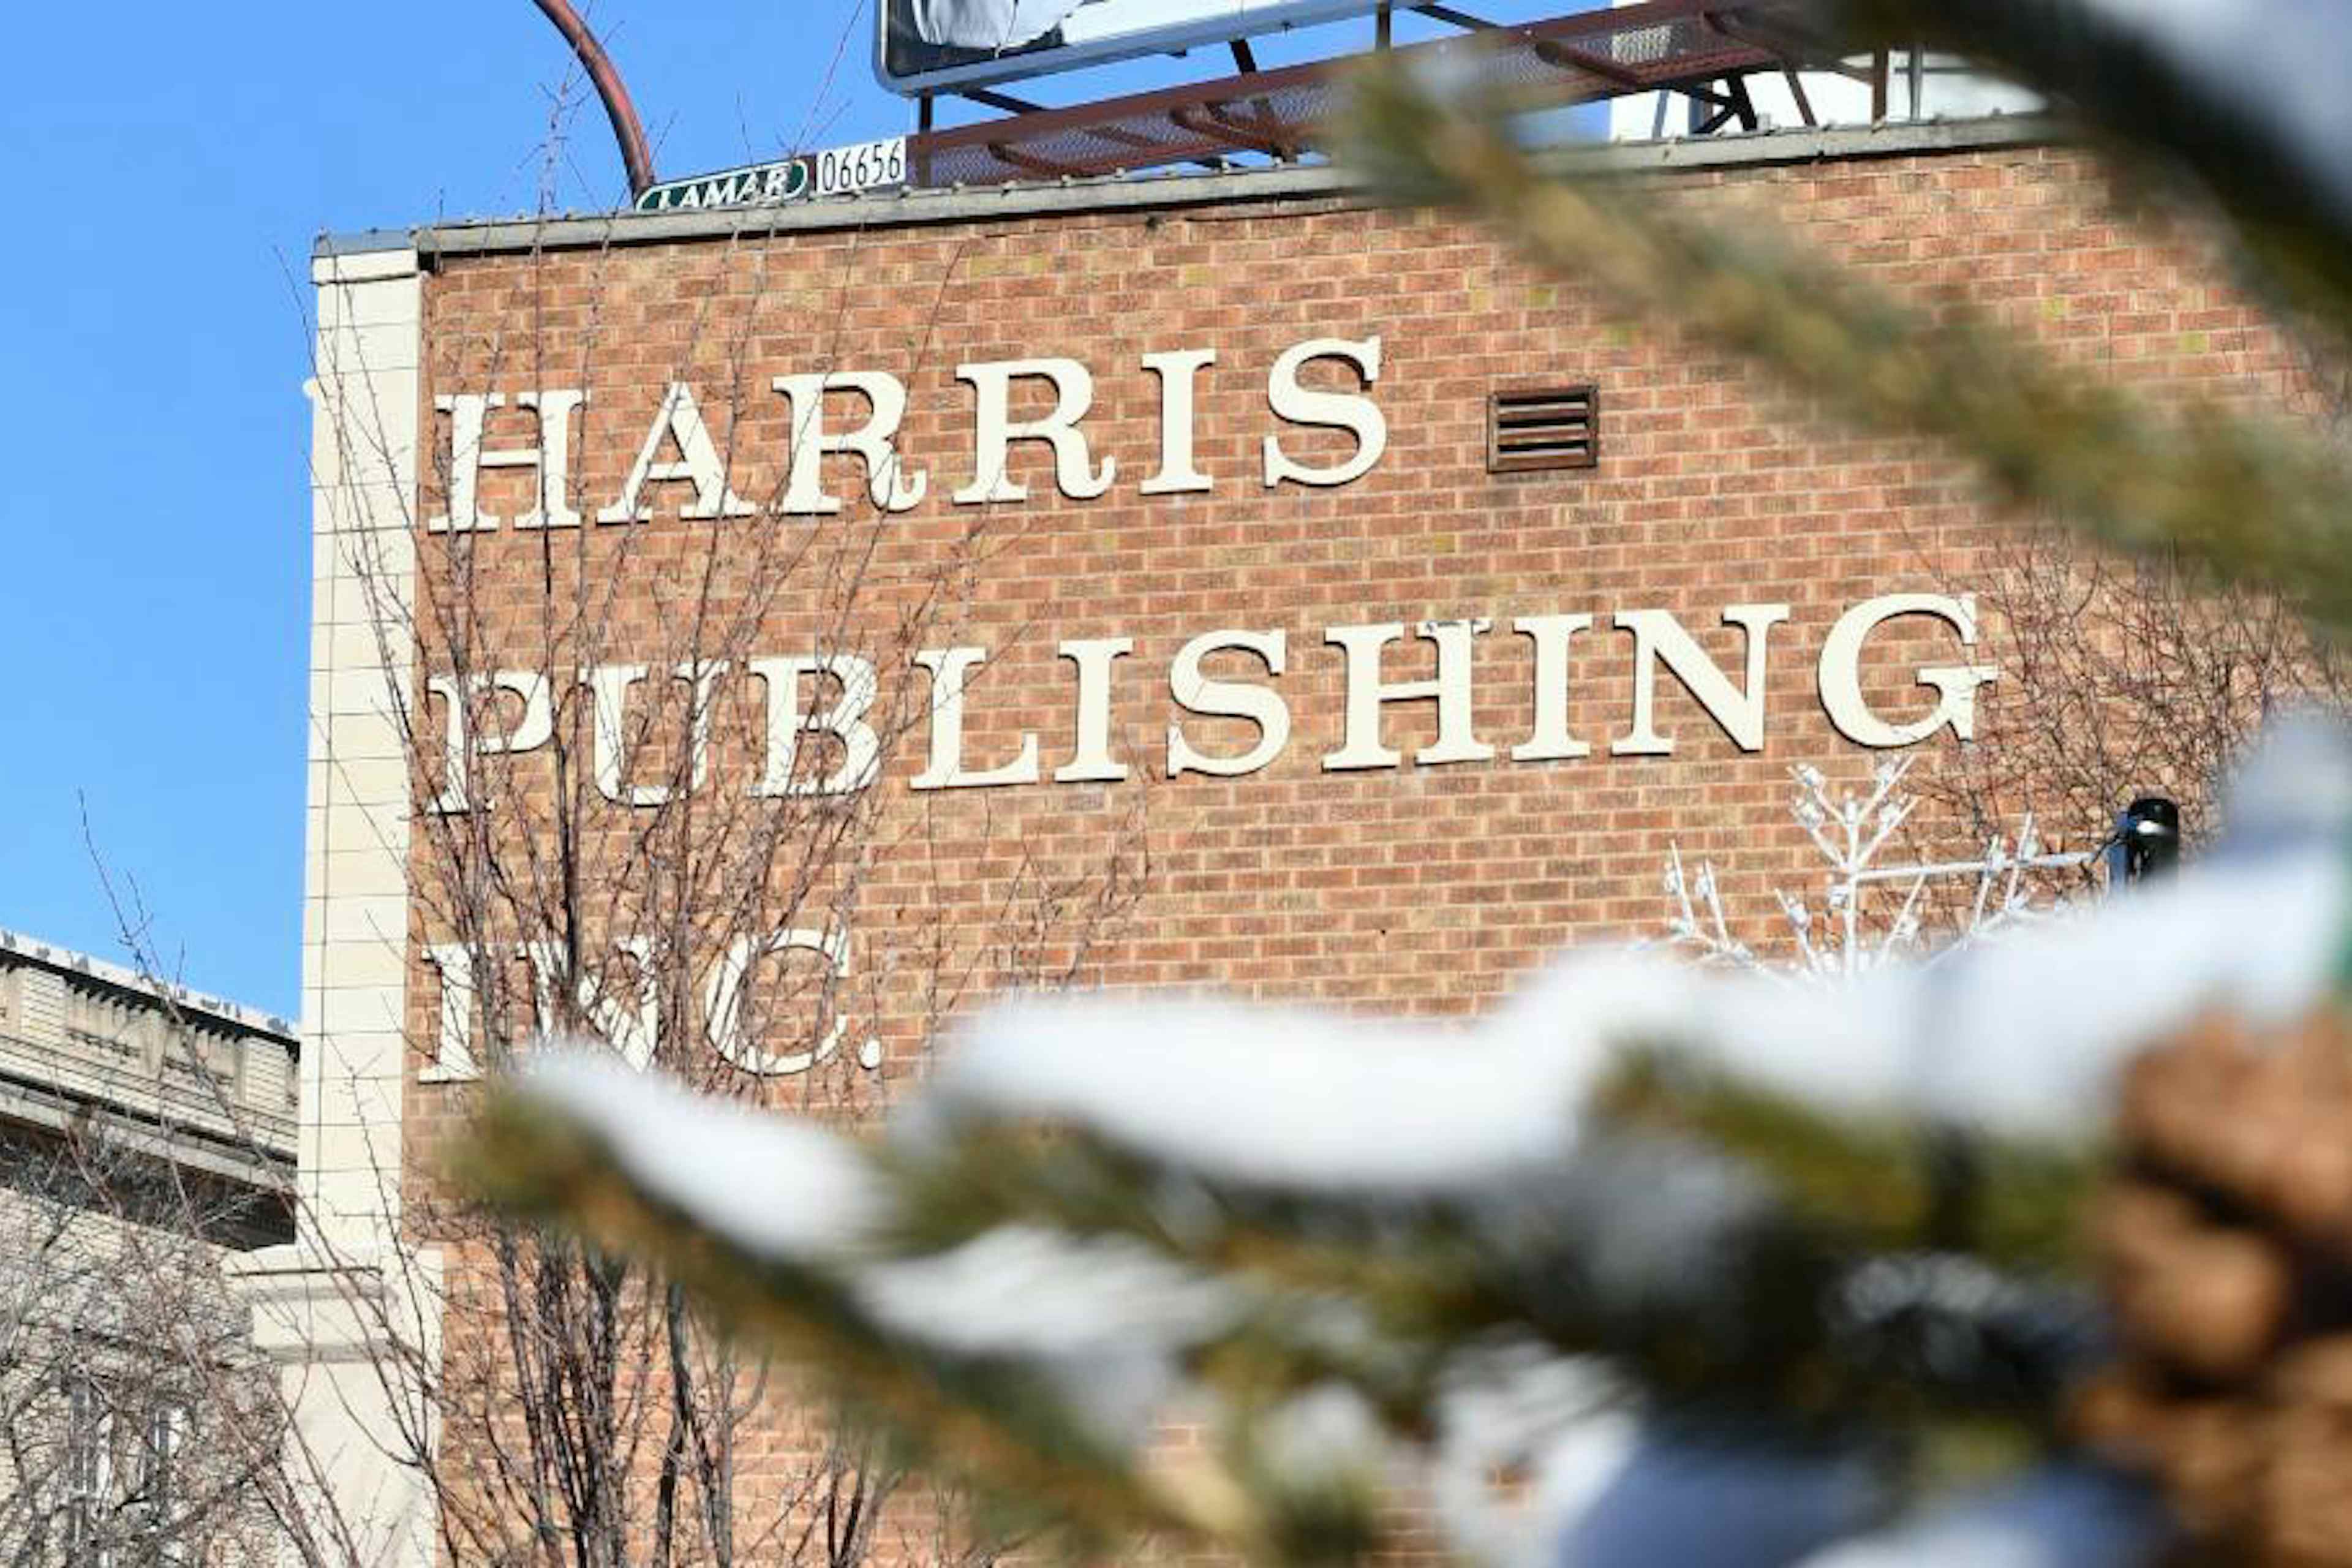 External view of Harris Publishing Inc. of Idaho Falls in the Yellowstone Teton Territory, dusted with a covering of snow.